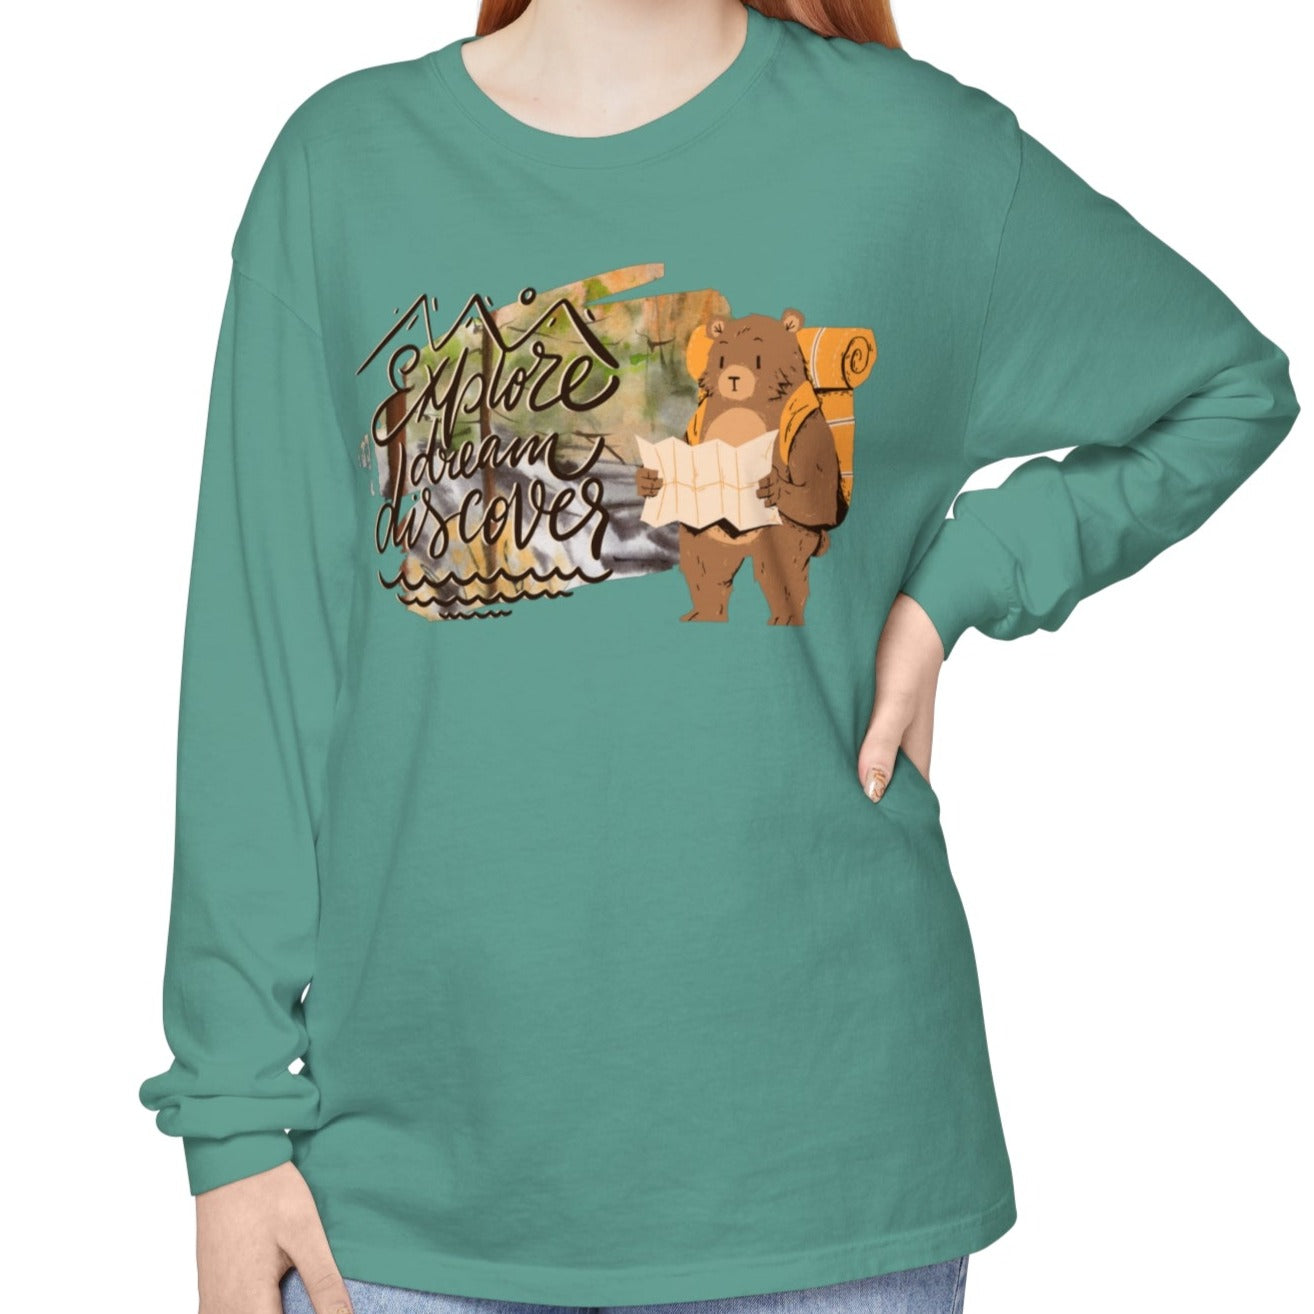 Women's Comfort Colors Long Sleeve Tee: 'Explore, Dream, Explore' with Backpacking Bear - Eddy and Rita